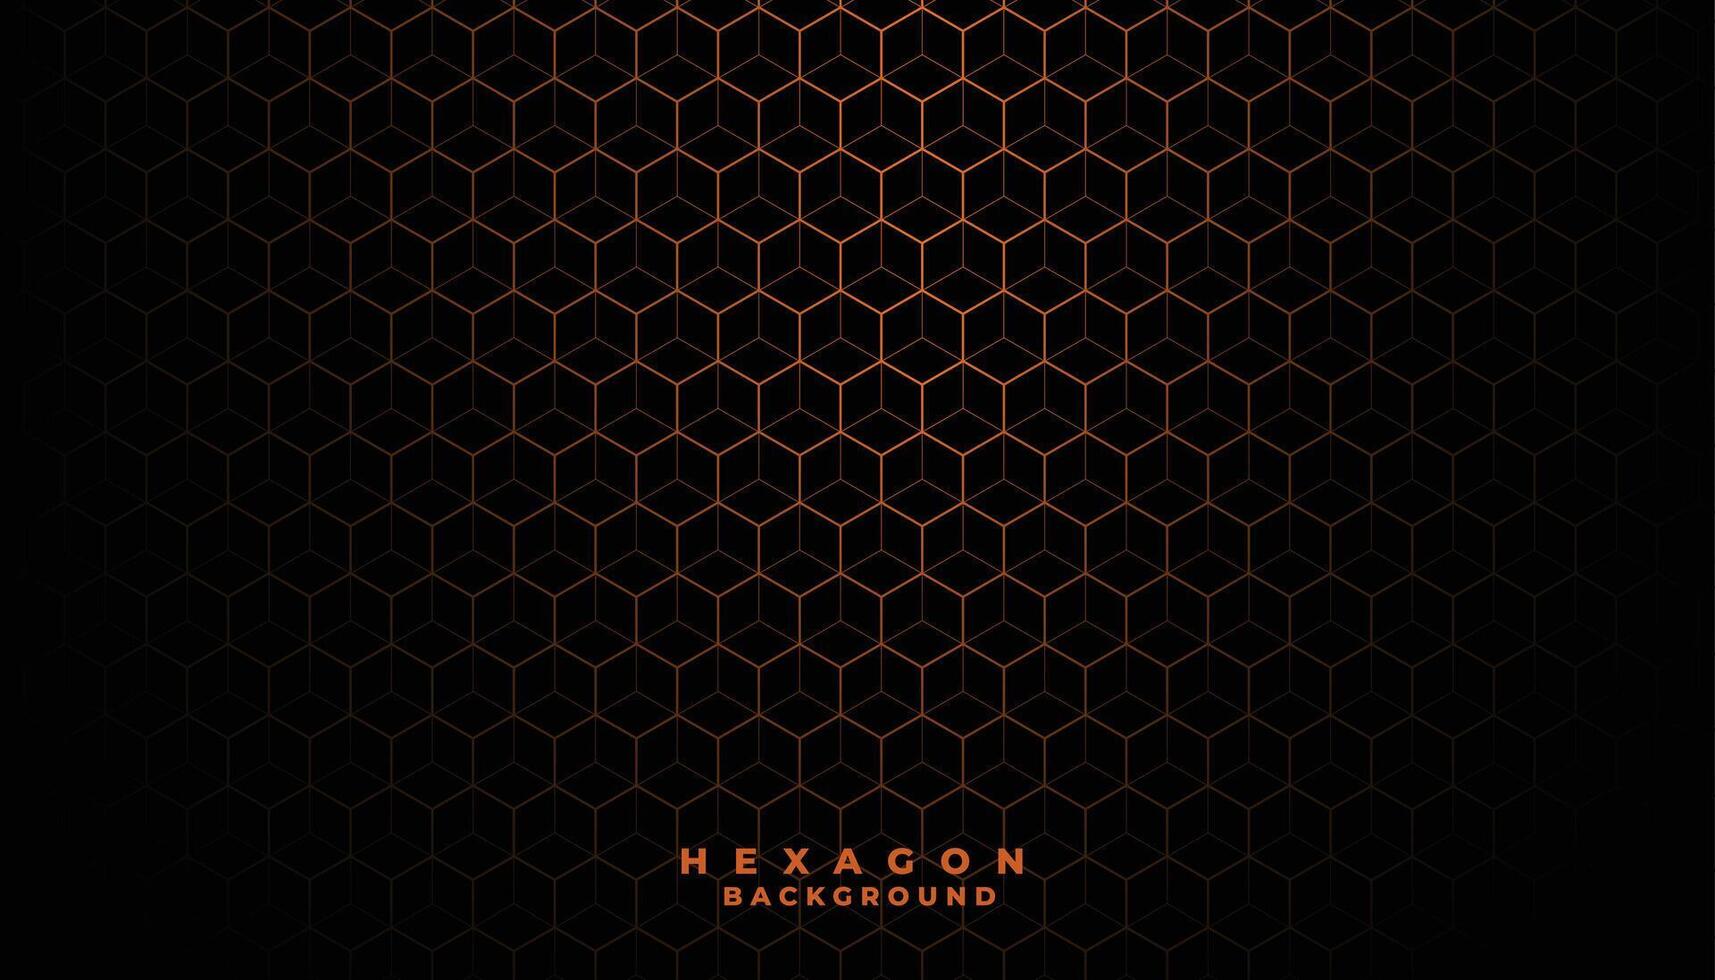 3d style glowing hexagonal pattern background for modern backdrop design vector